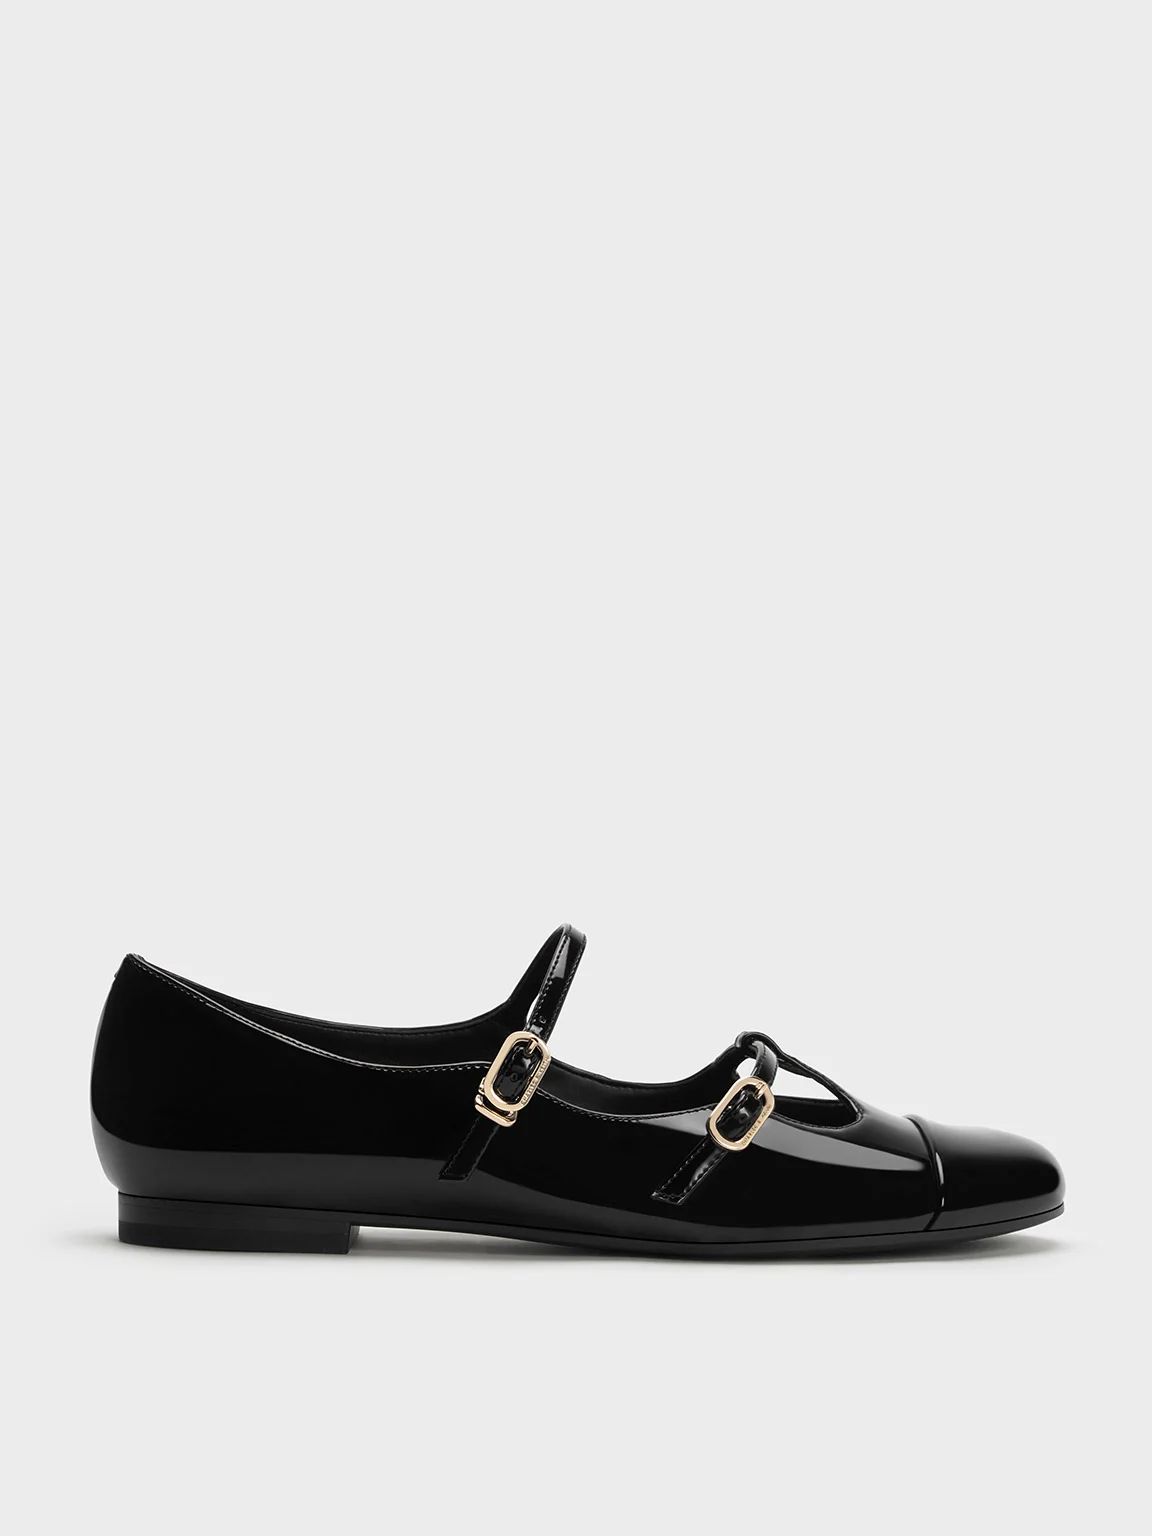 Black Boxed Double-Strap T-Bar Mary Janes | CHARLES & KEITH | Charles & Keith US